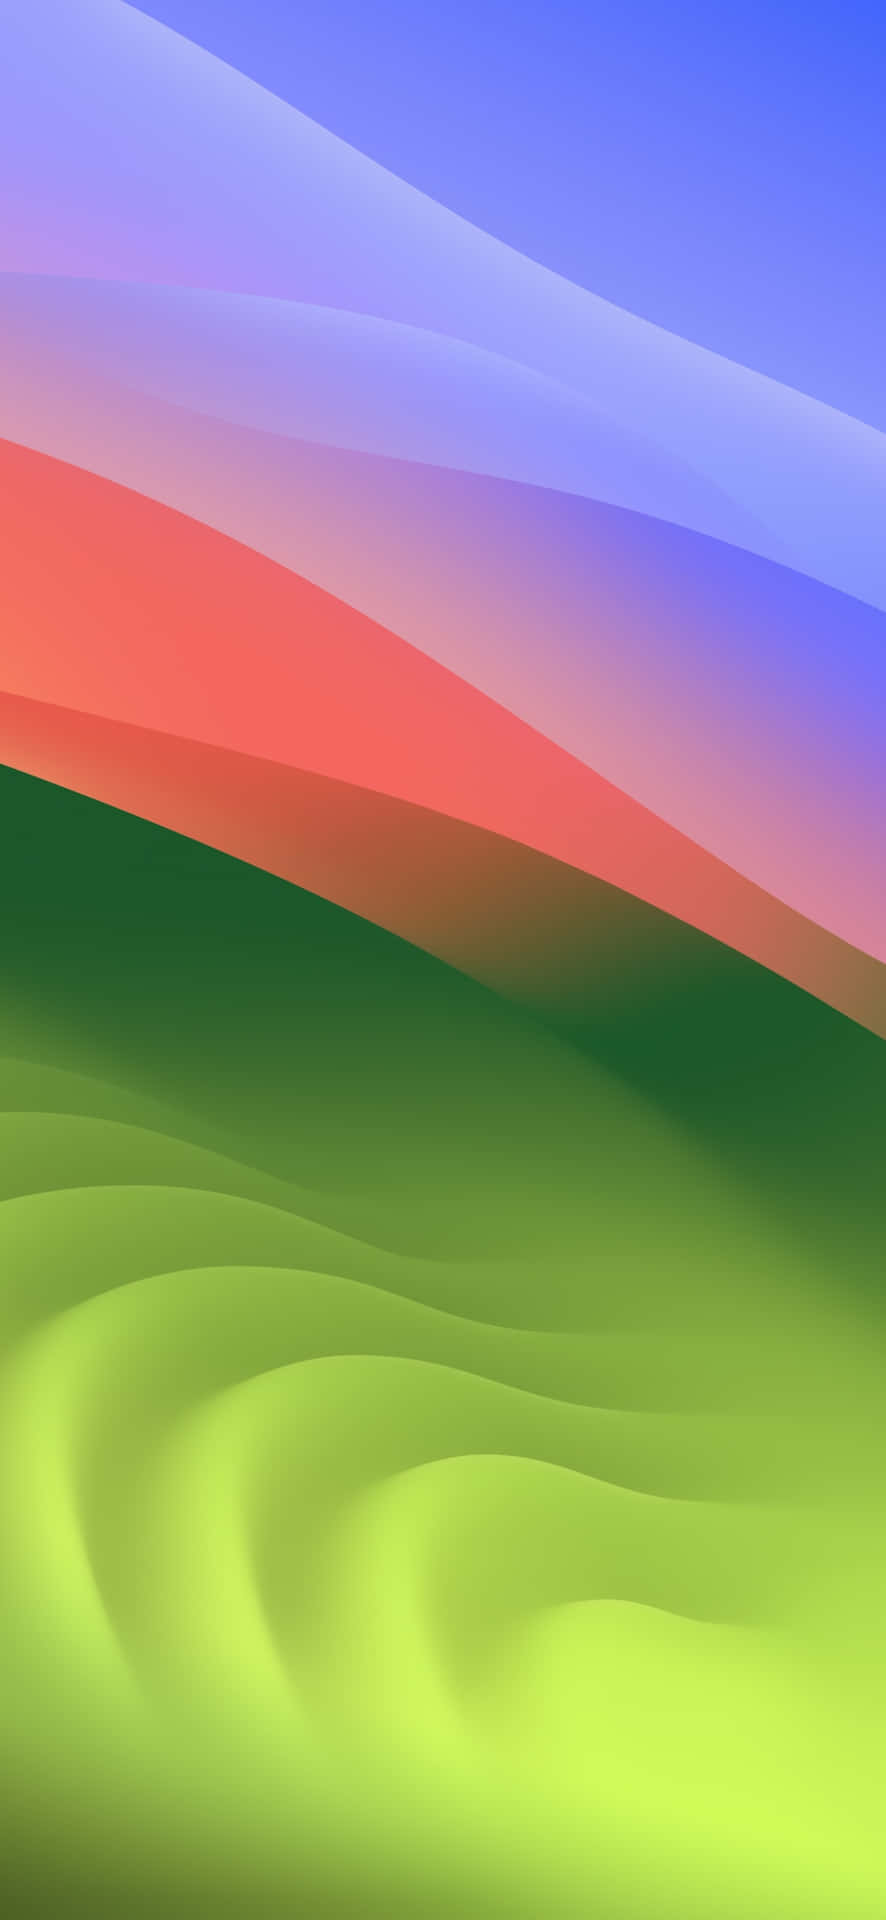 Abstract Colorful Waves Background Wallpaper